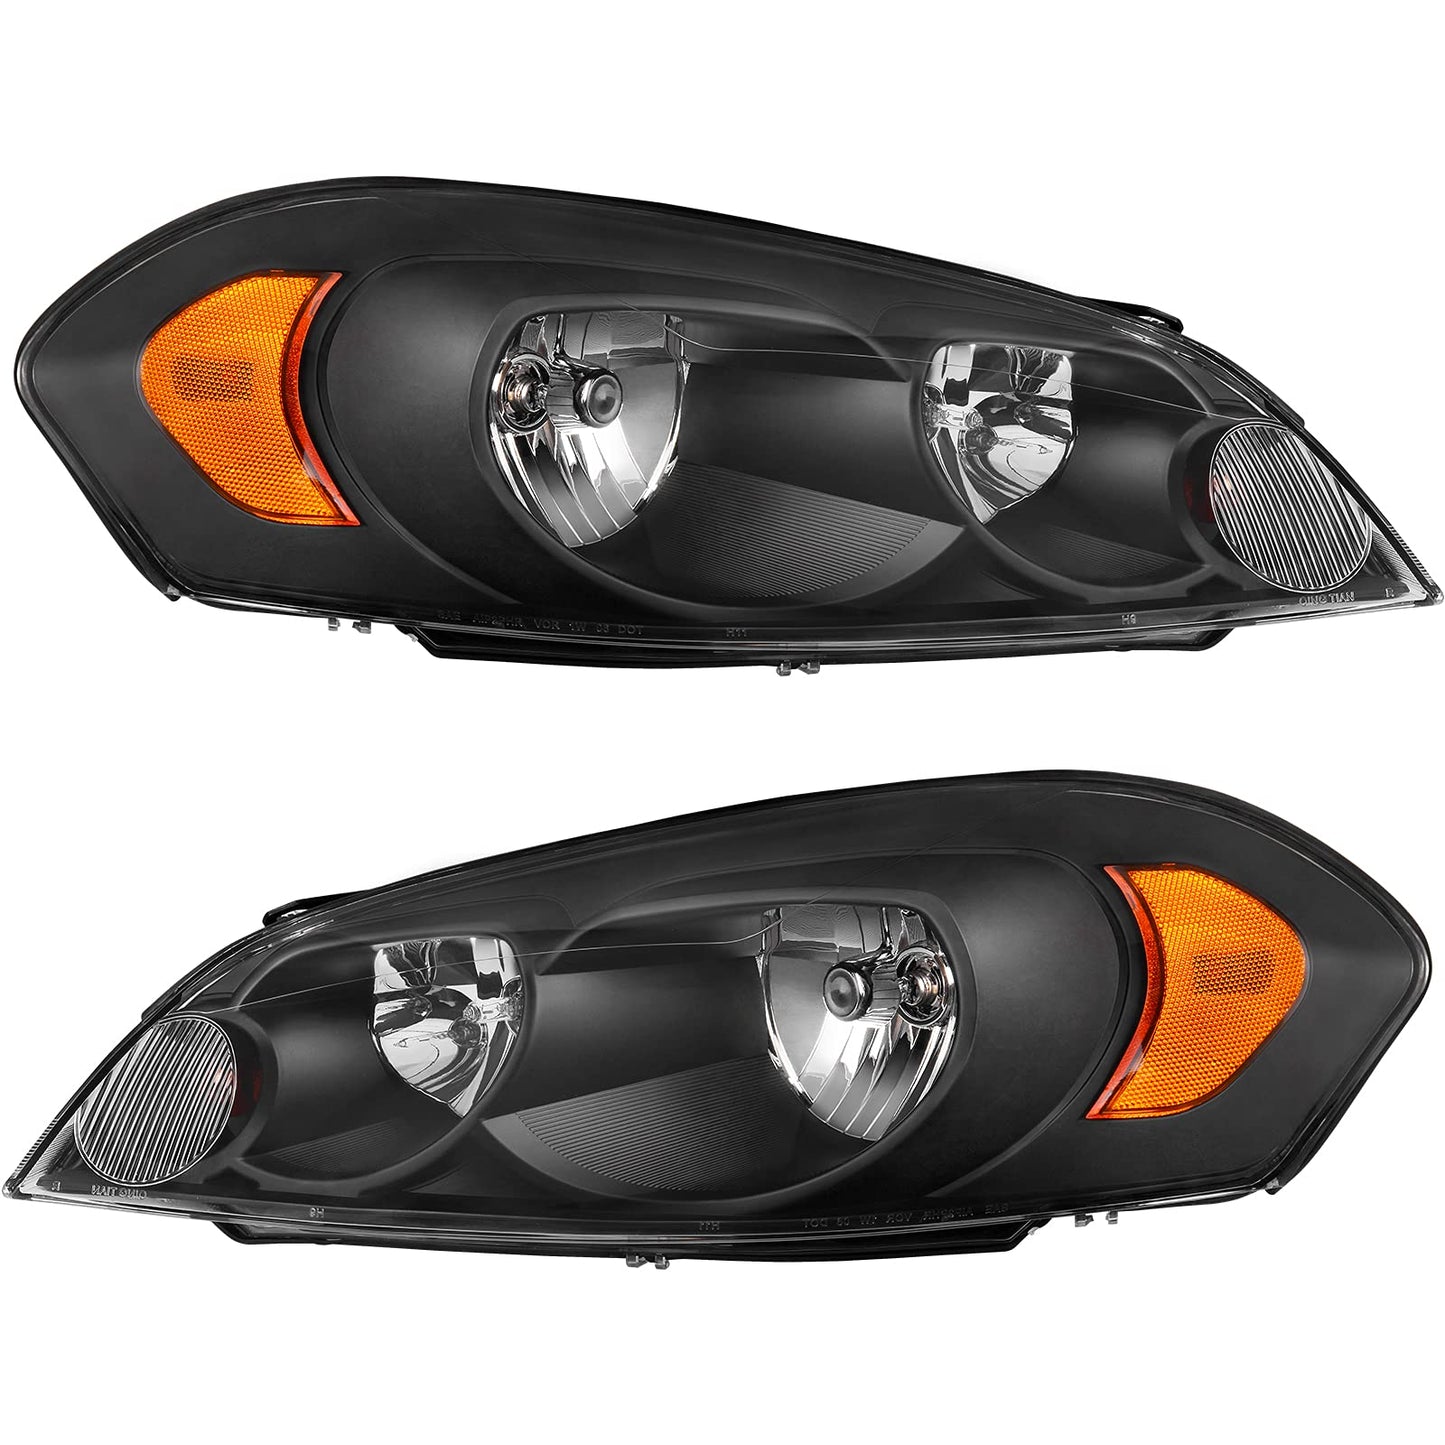 AUTOSAVER88 Headlight Assembly Compatible with 2006-2013 Chevy Impala 06 07 Chevy Monte Carlo Replacement Headlamp Black Housing Amber Reflector Clear Lens A Black Housing Amber Reflector Clear Lens OE Replacement